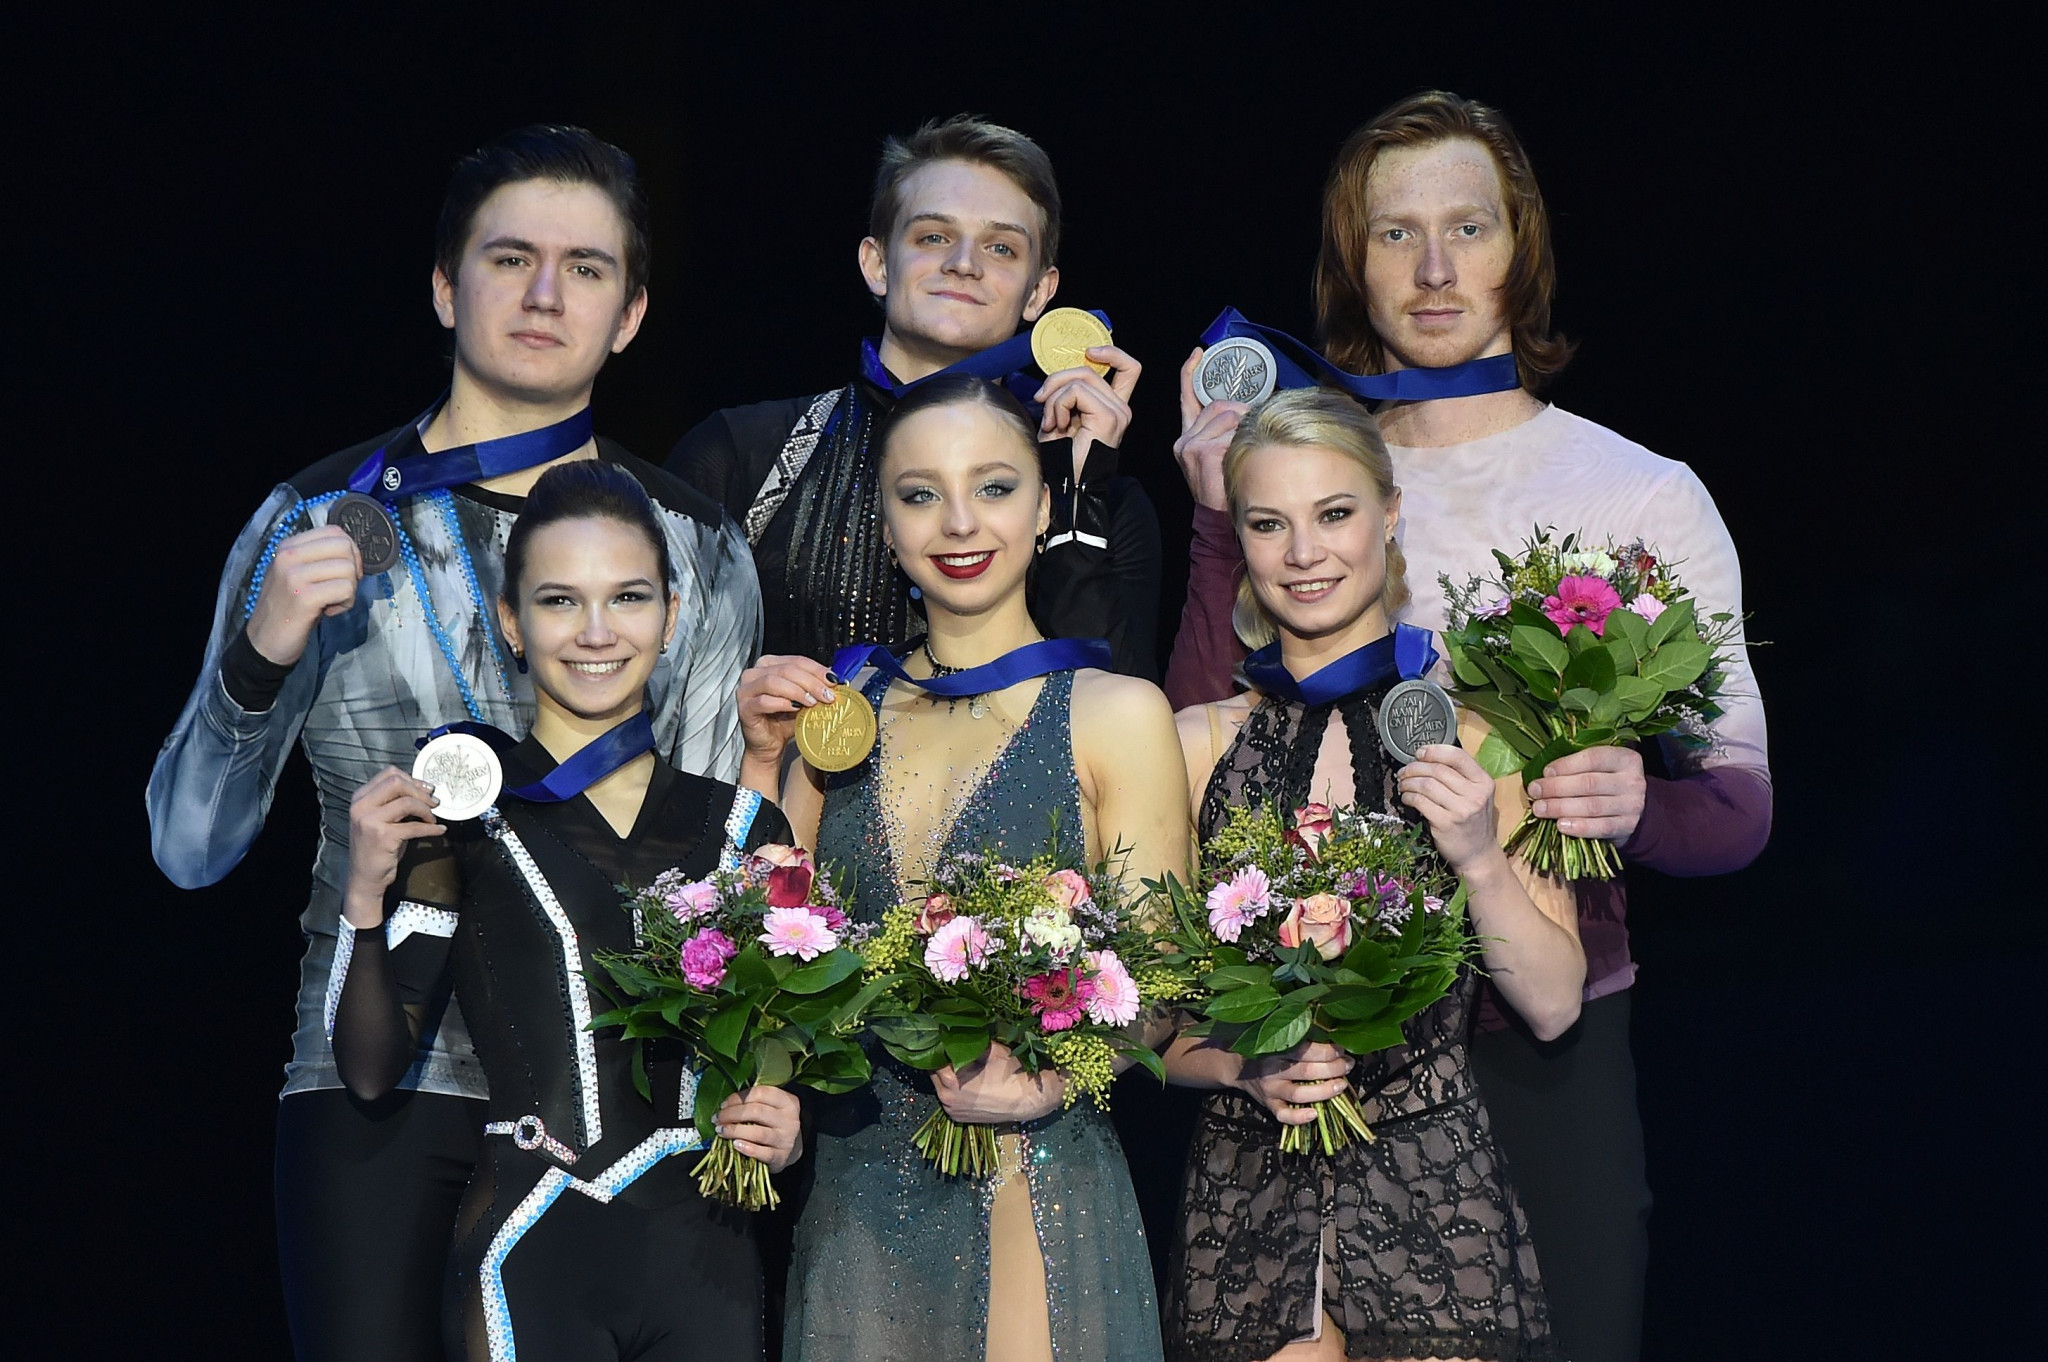 Aleksandra Boikova and Dmitri Kozlovskii, centre, lead a Russian clean sweep of the podium at the ISU European Figure Skating Championships in Graz with Evgenia Tarasova and Vladimir Morozov, left, and Daria Pavliuchenko and Denis Khodykin, right, winning the silver and bronze medals ©Getty Images